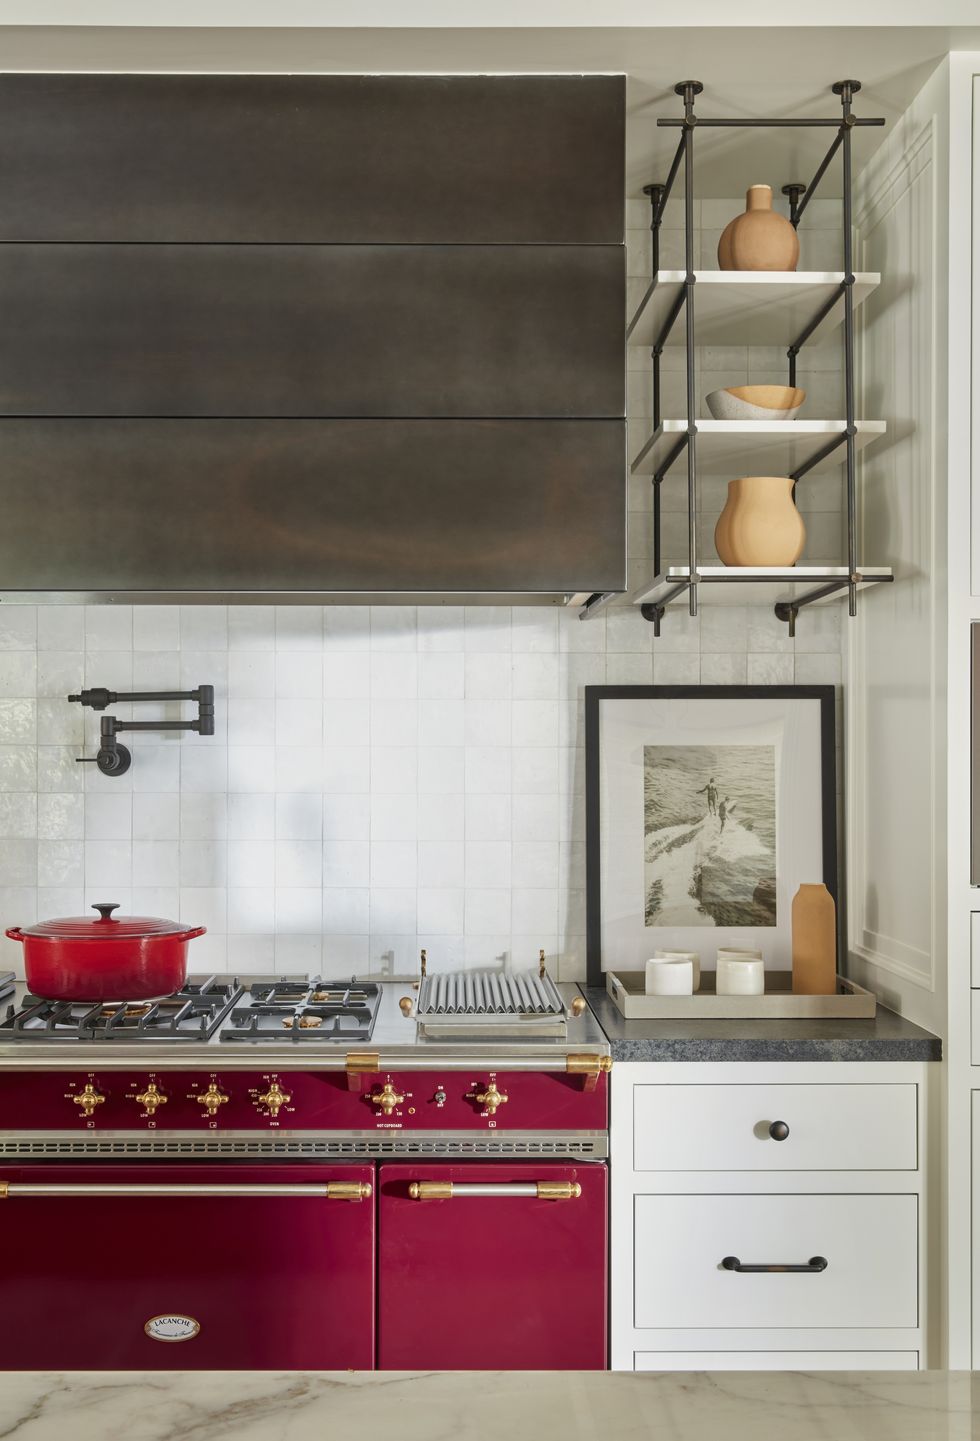 pacific palisades residence of designer lindsay chambers kitchen stove